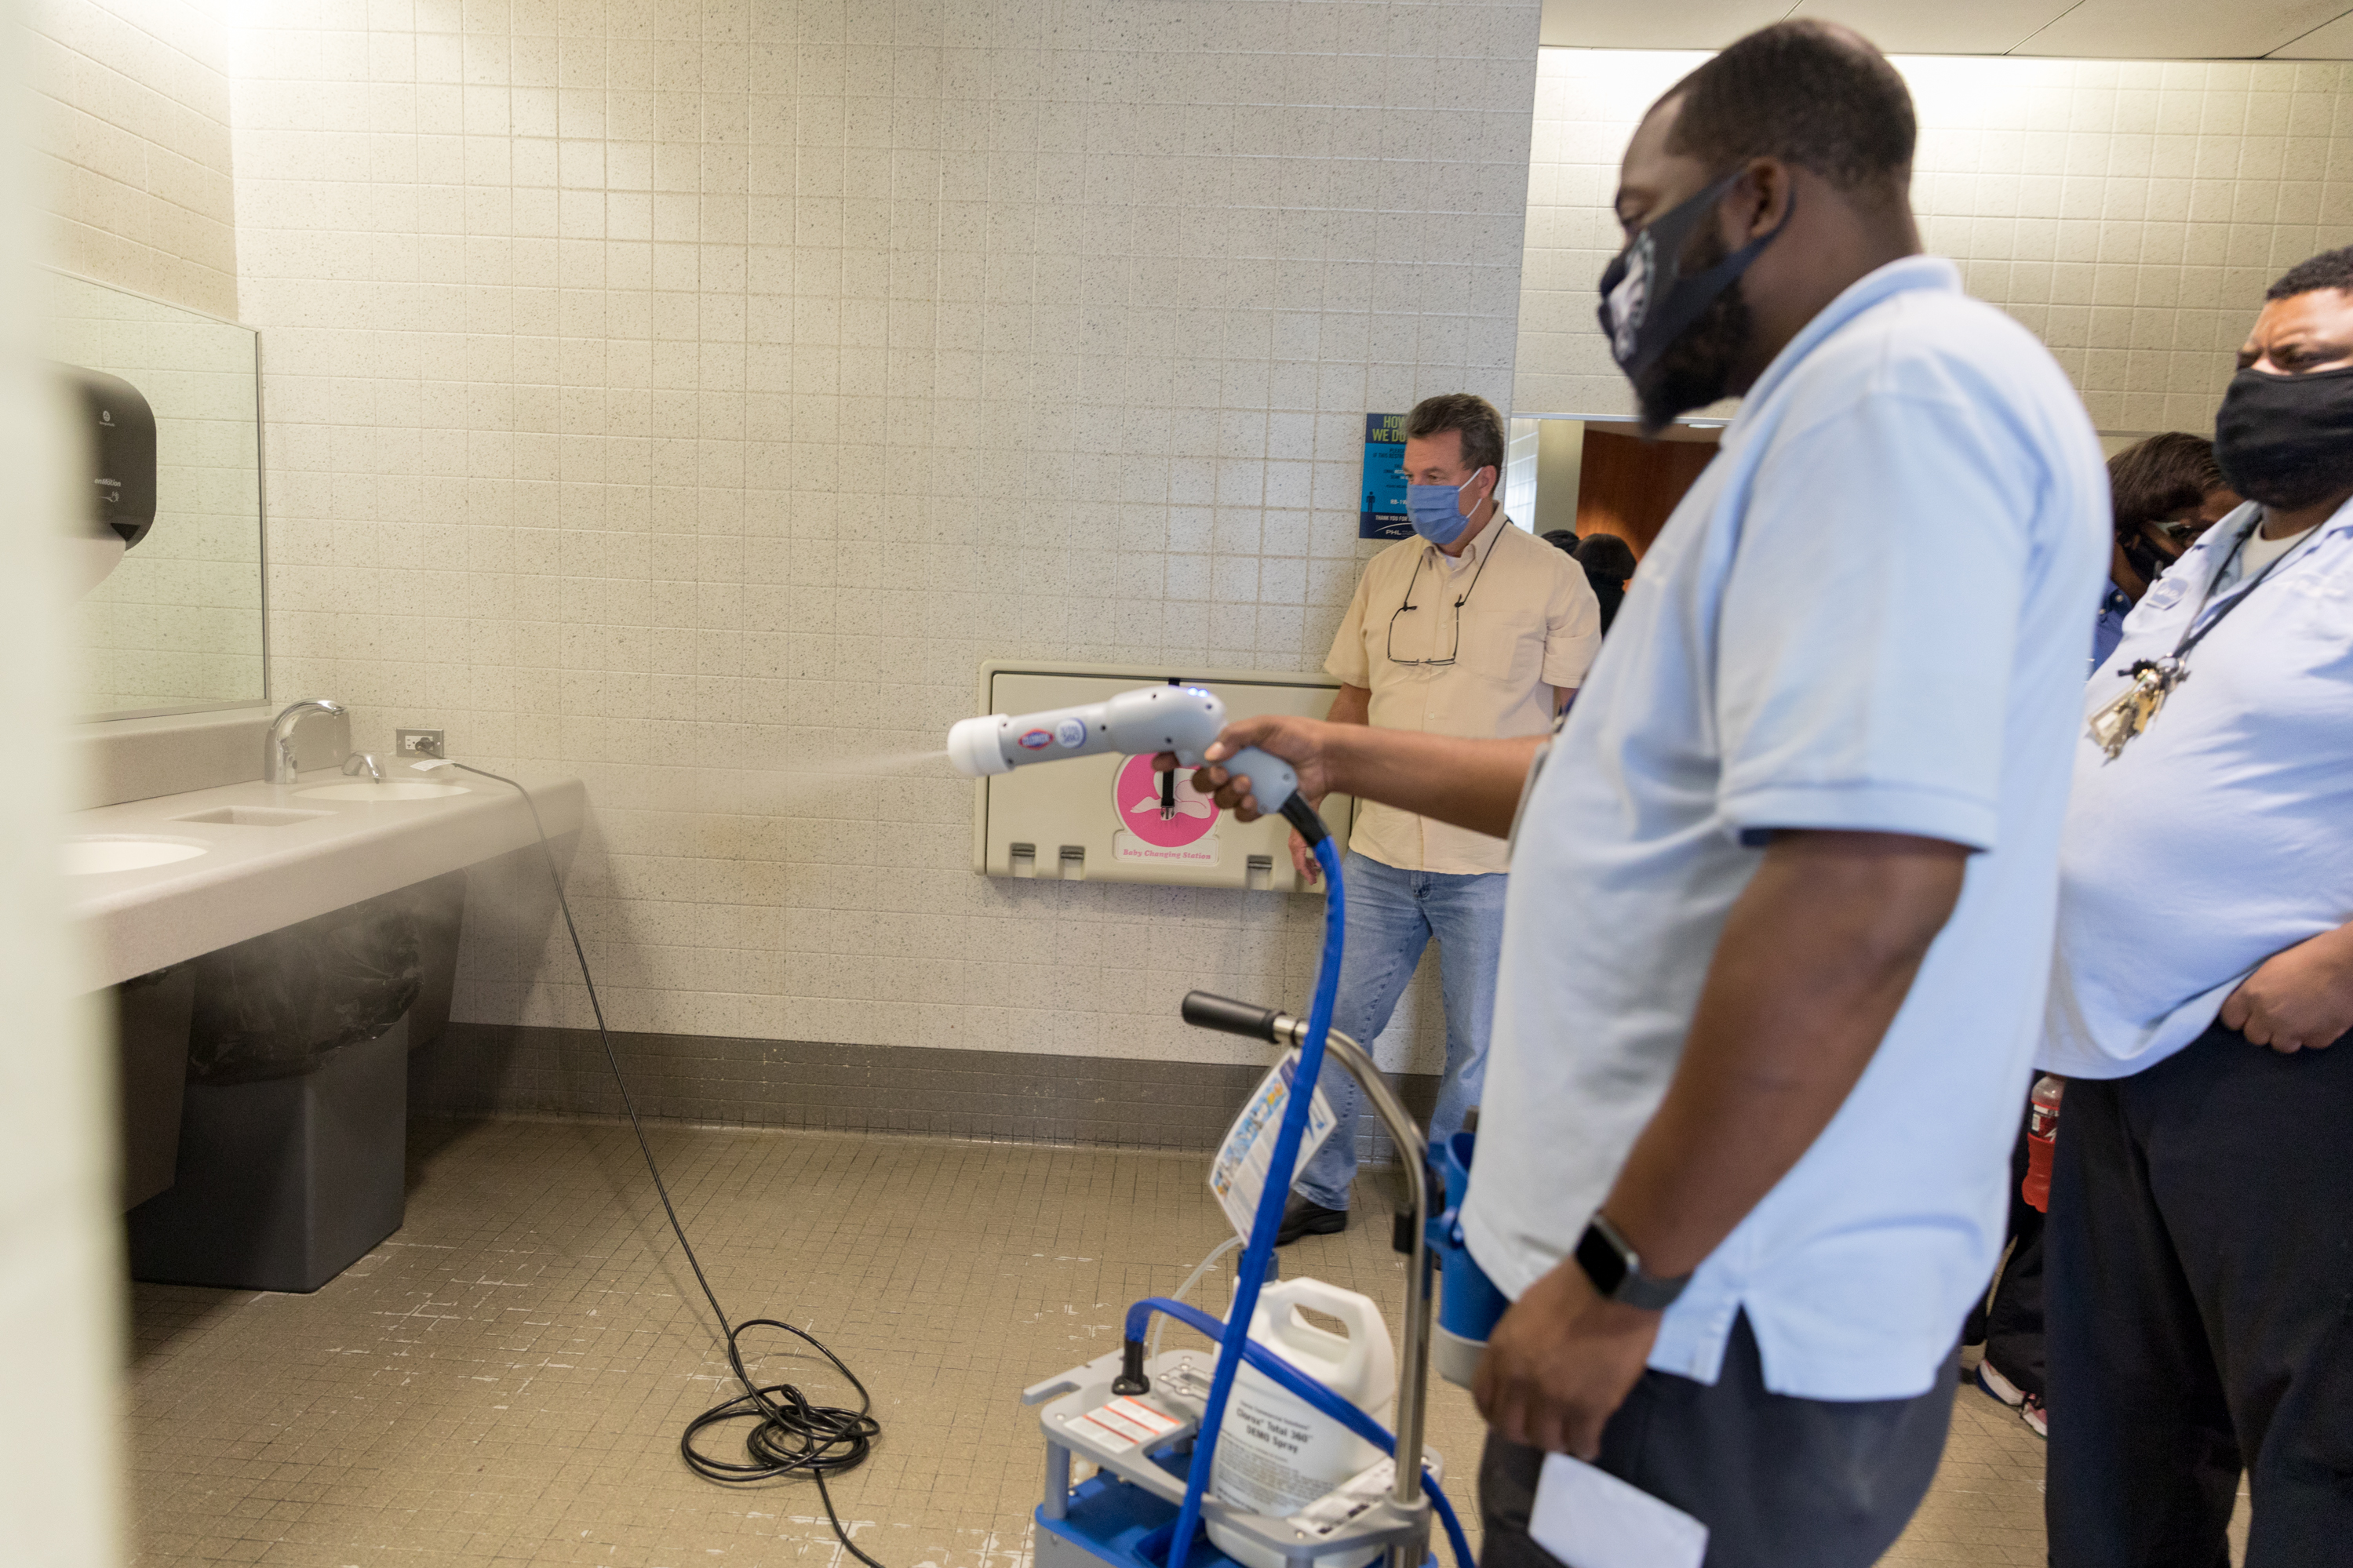 PHL Custodial team sanitizes a restroom with the Clorox 360 electrostatic spraying system